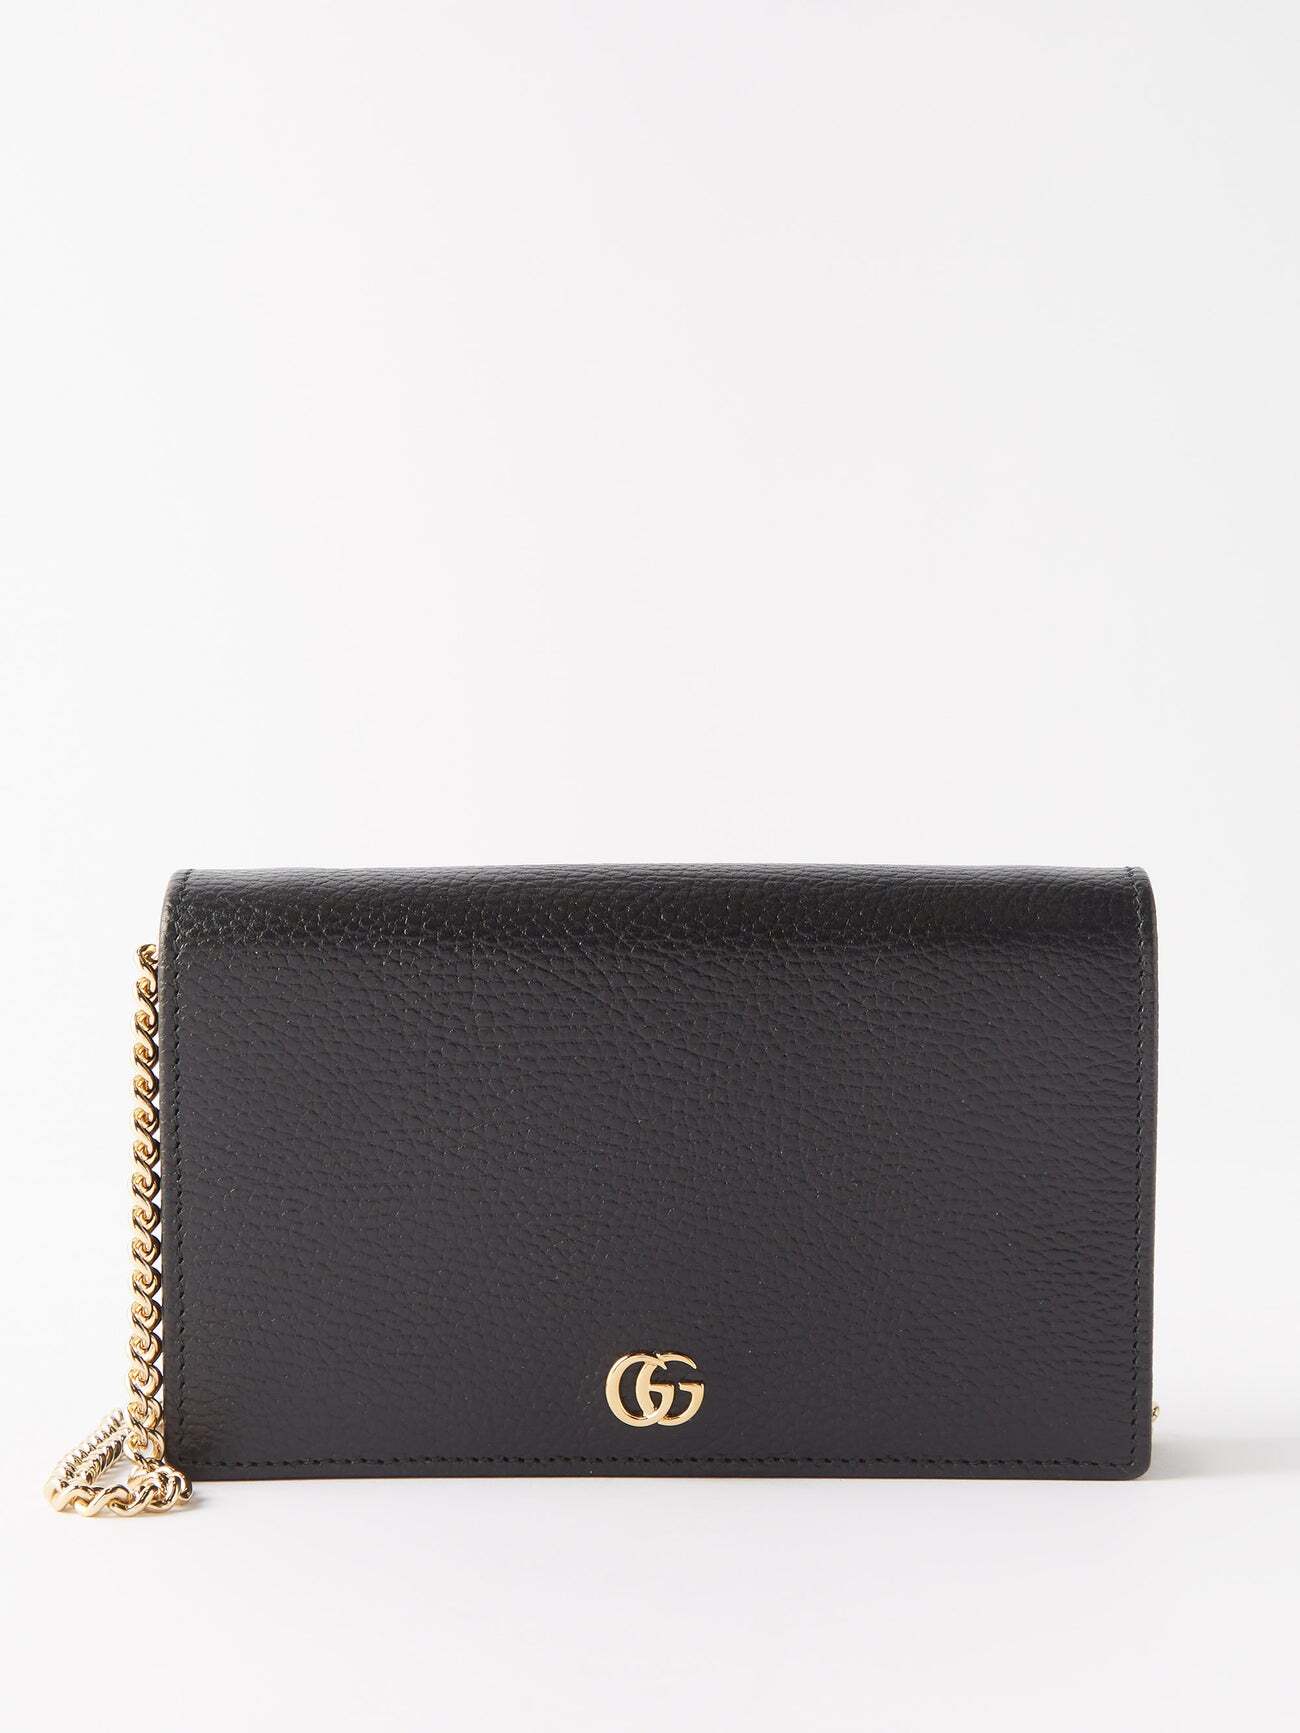 Gucci - GG Marmont Small Leather Cross-body Bag - Womens - Black